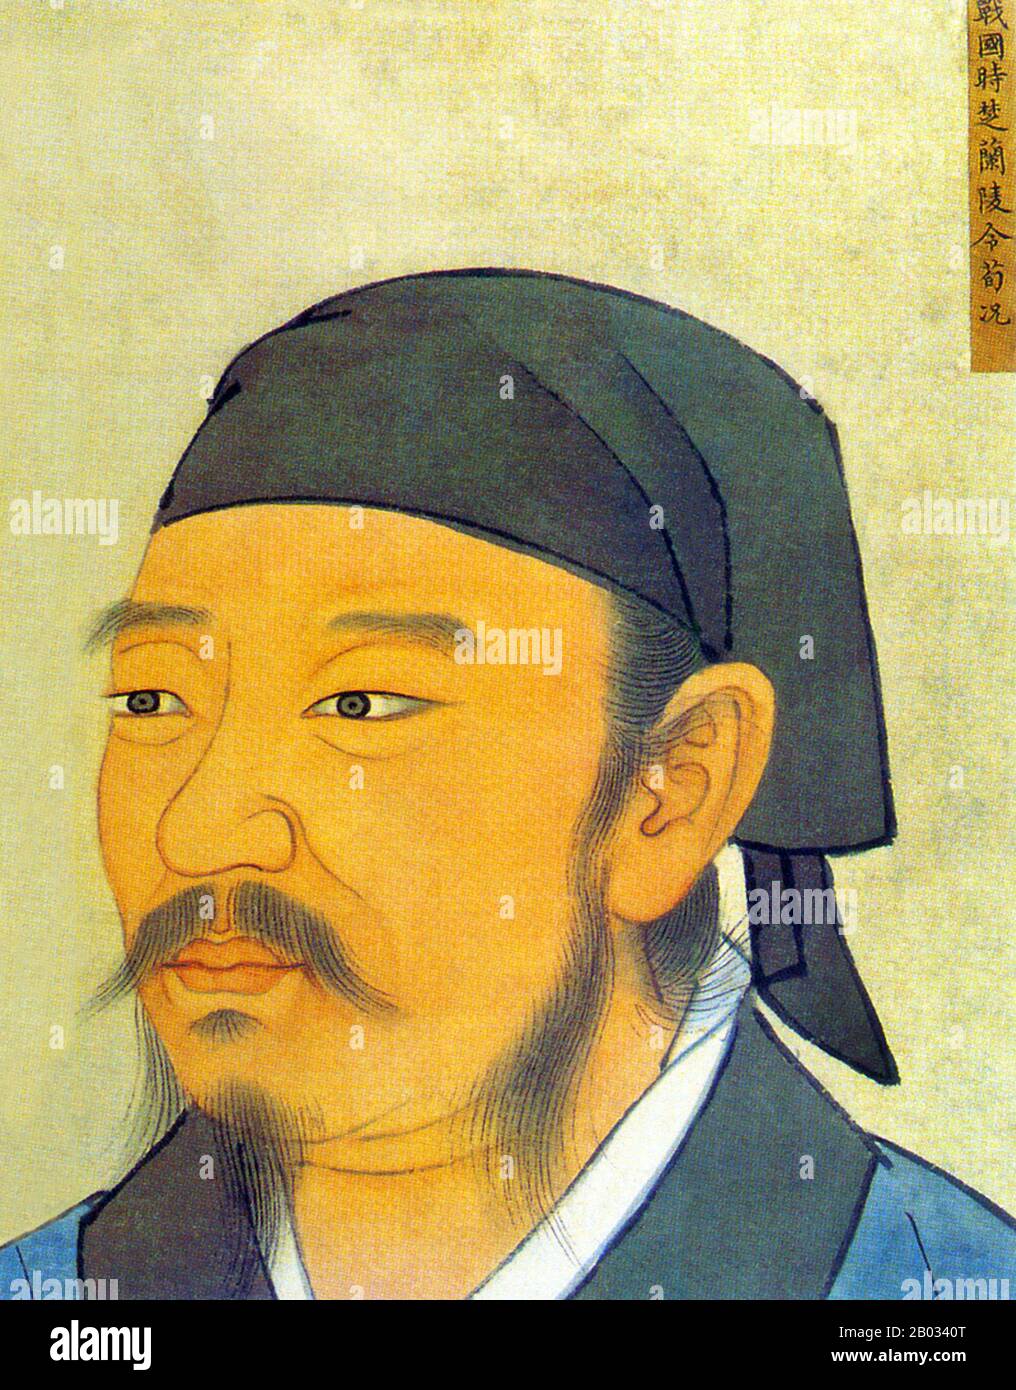 Xun Kuang was a Chinese Realist Confucian philosopher who lived during the Warring States period and contributed to one of the Hundred Schools of Thought.  A book known as the Xunzi, an influential collection of essays, is traditionally attributed to him. Xunzi witnessed the chaos surrounding the fall of the Zhou dynasty and rise of the Qin state – which upheld legalistic doctrines focusing on state control, by means of law and penalties. Xunzi's variety of Confucianism therefore has a darker, more pragmatic flavour than the optimistic Confucianism of Mencius, who tended to view humans as inna Stock Photo